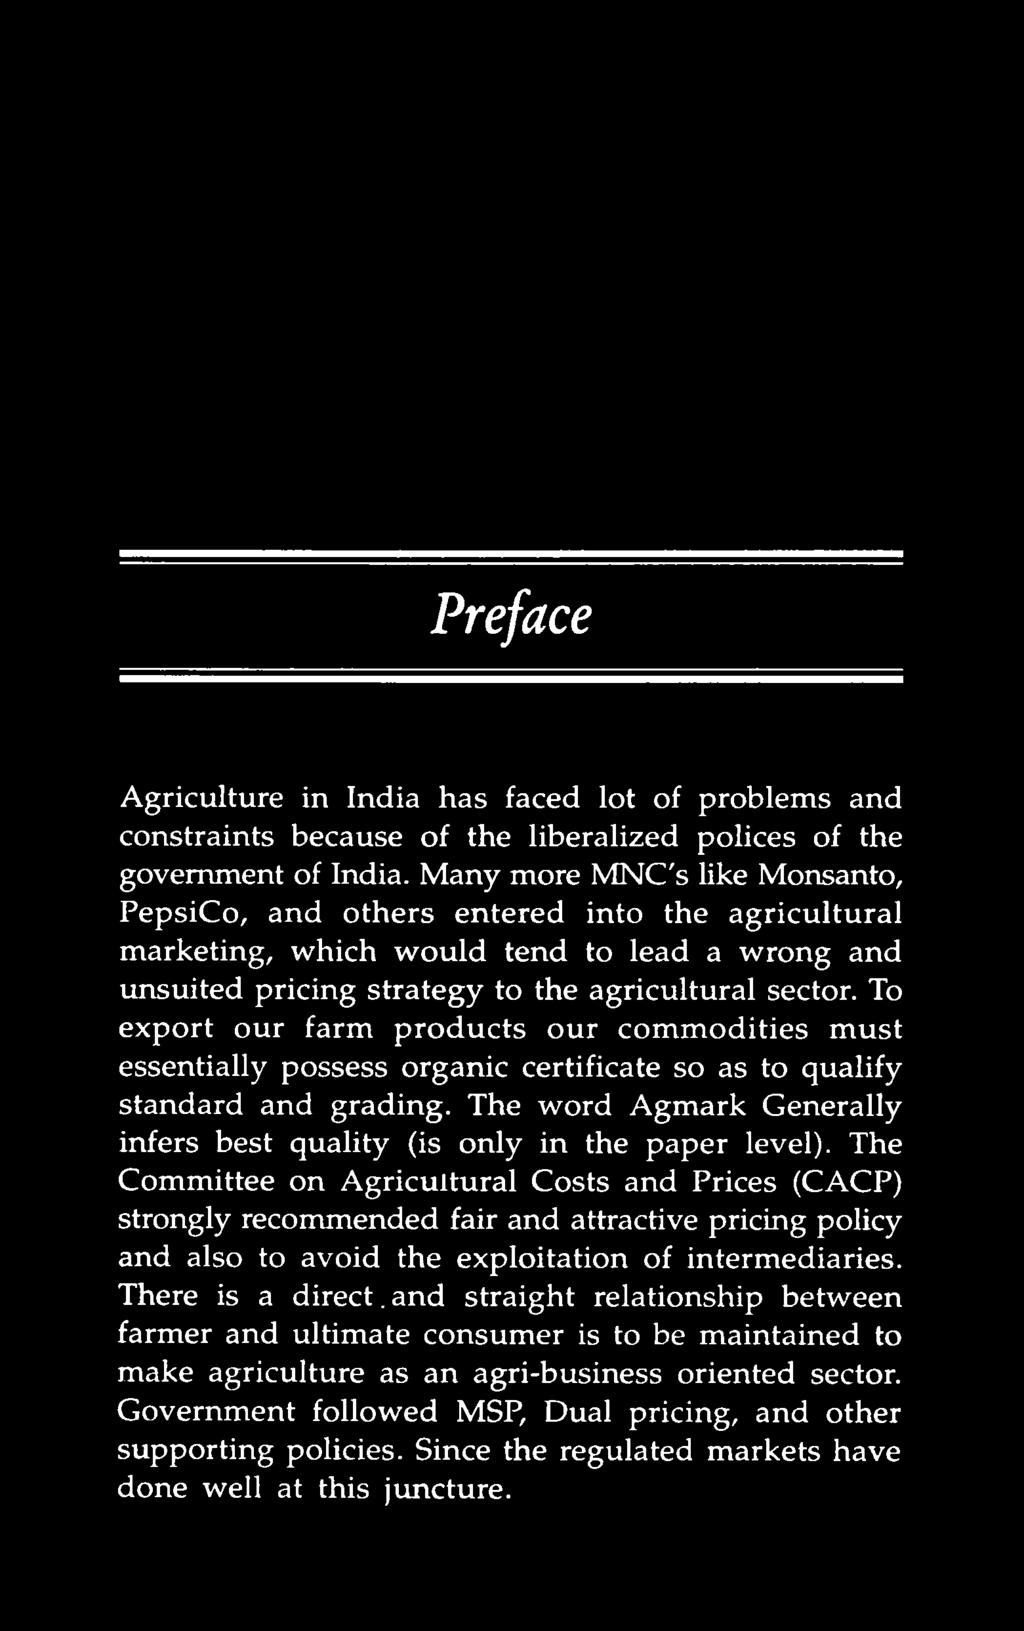 Preface Agriculture in India has faced lot of problems and constraints because of the liberalized polices of the government of India.